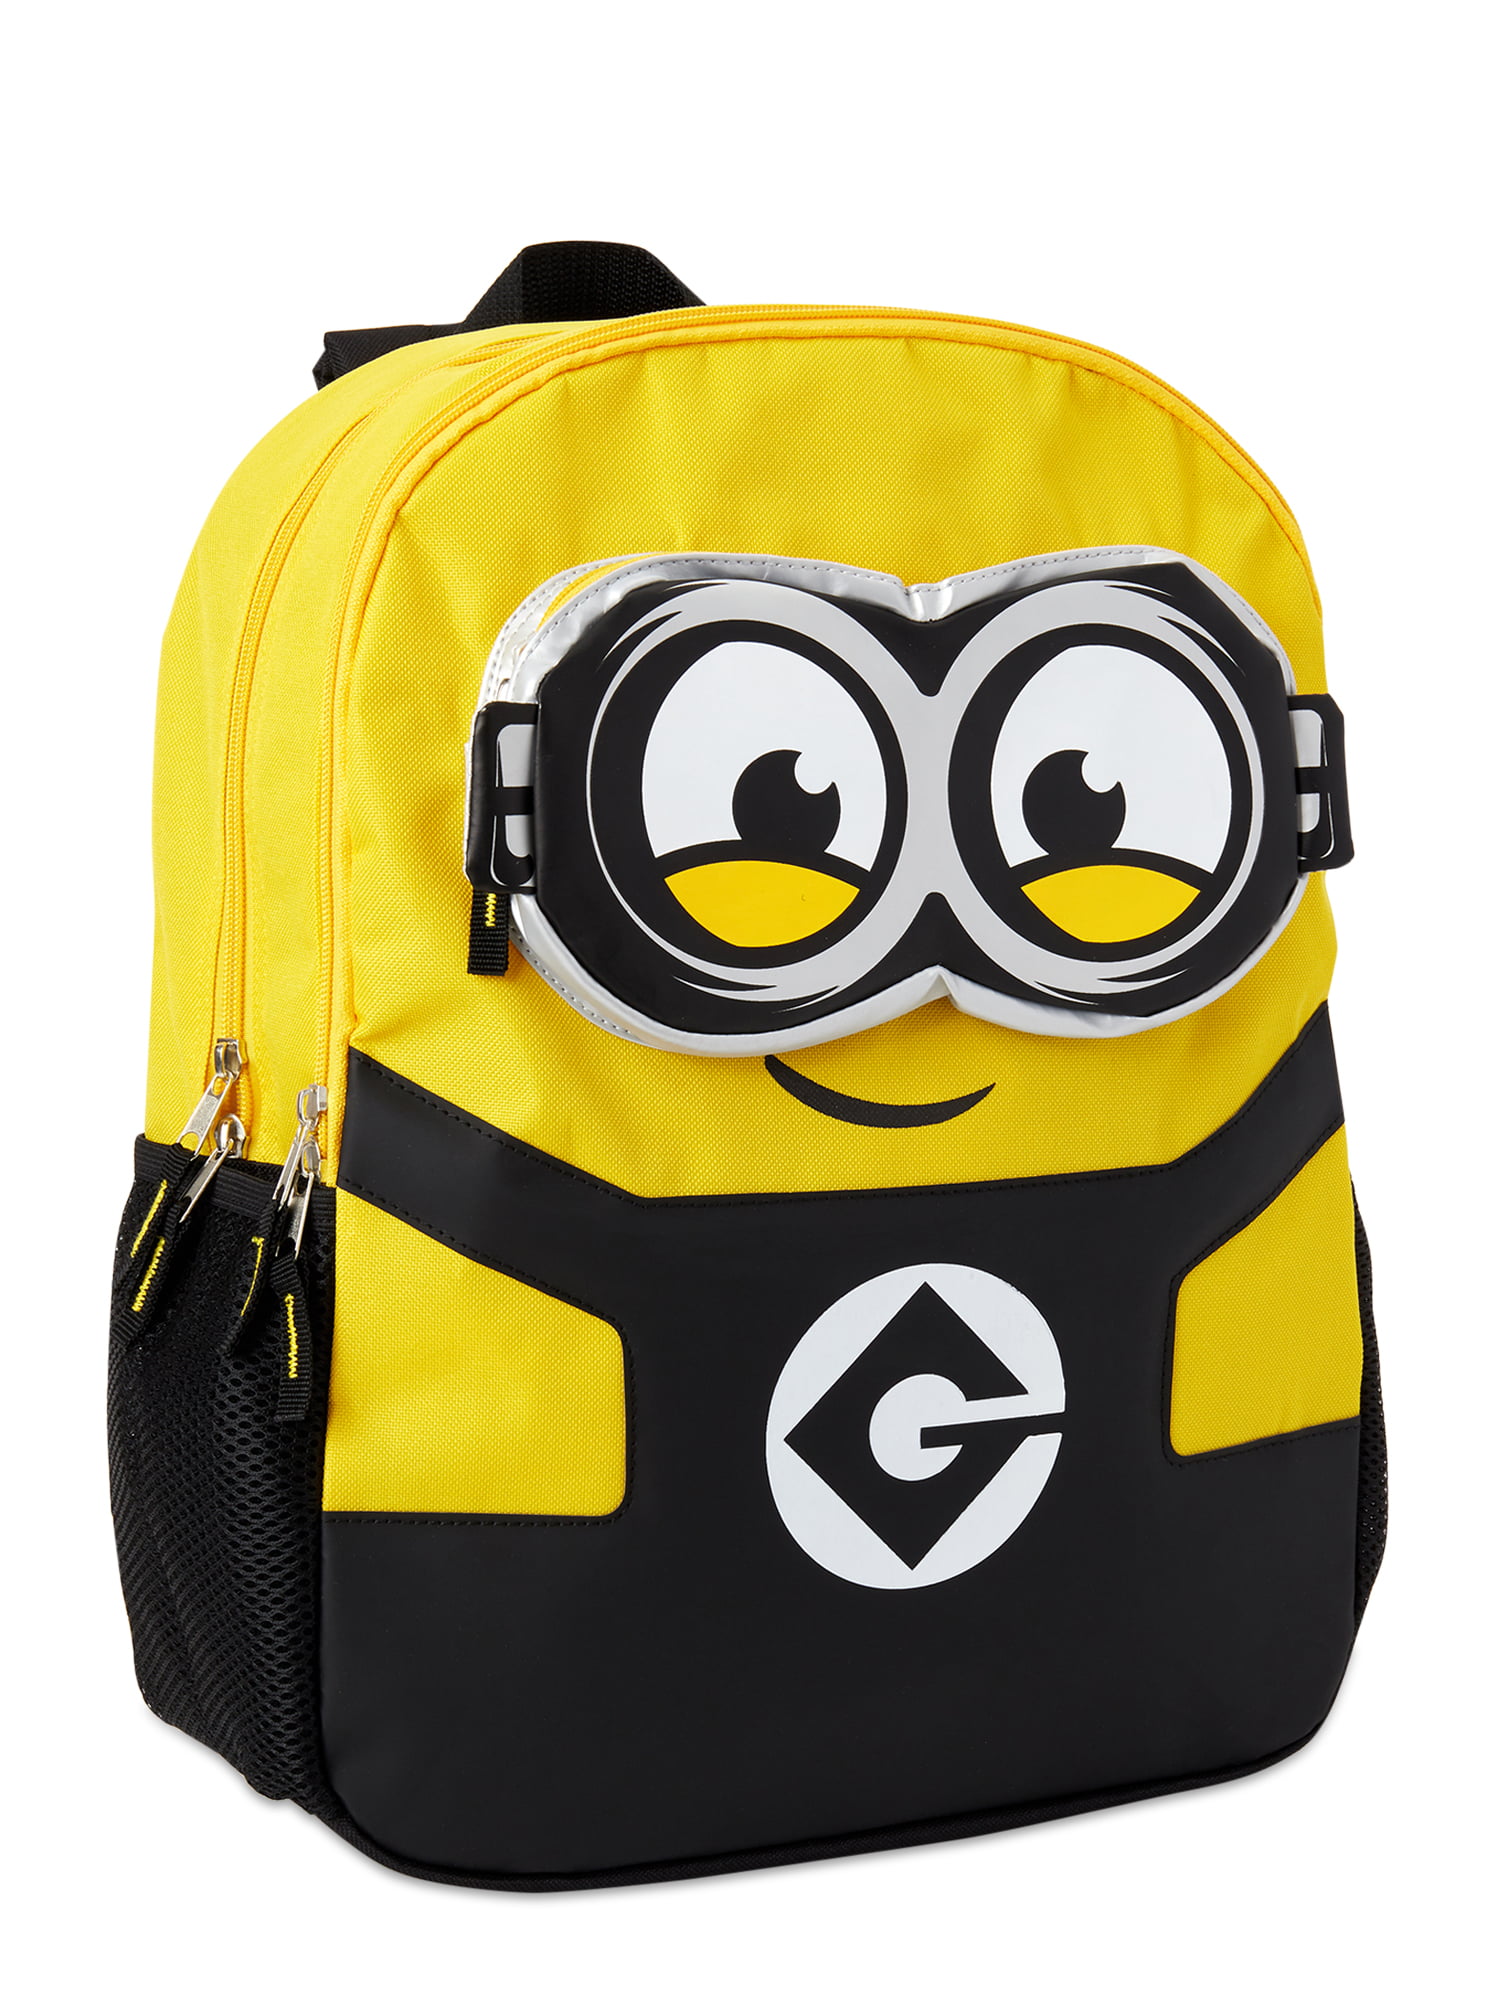 Bob the Minion  Backpack for Sale by WenyHutGenerals